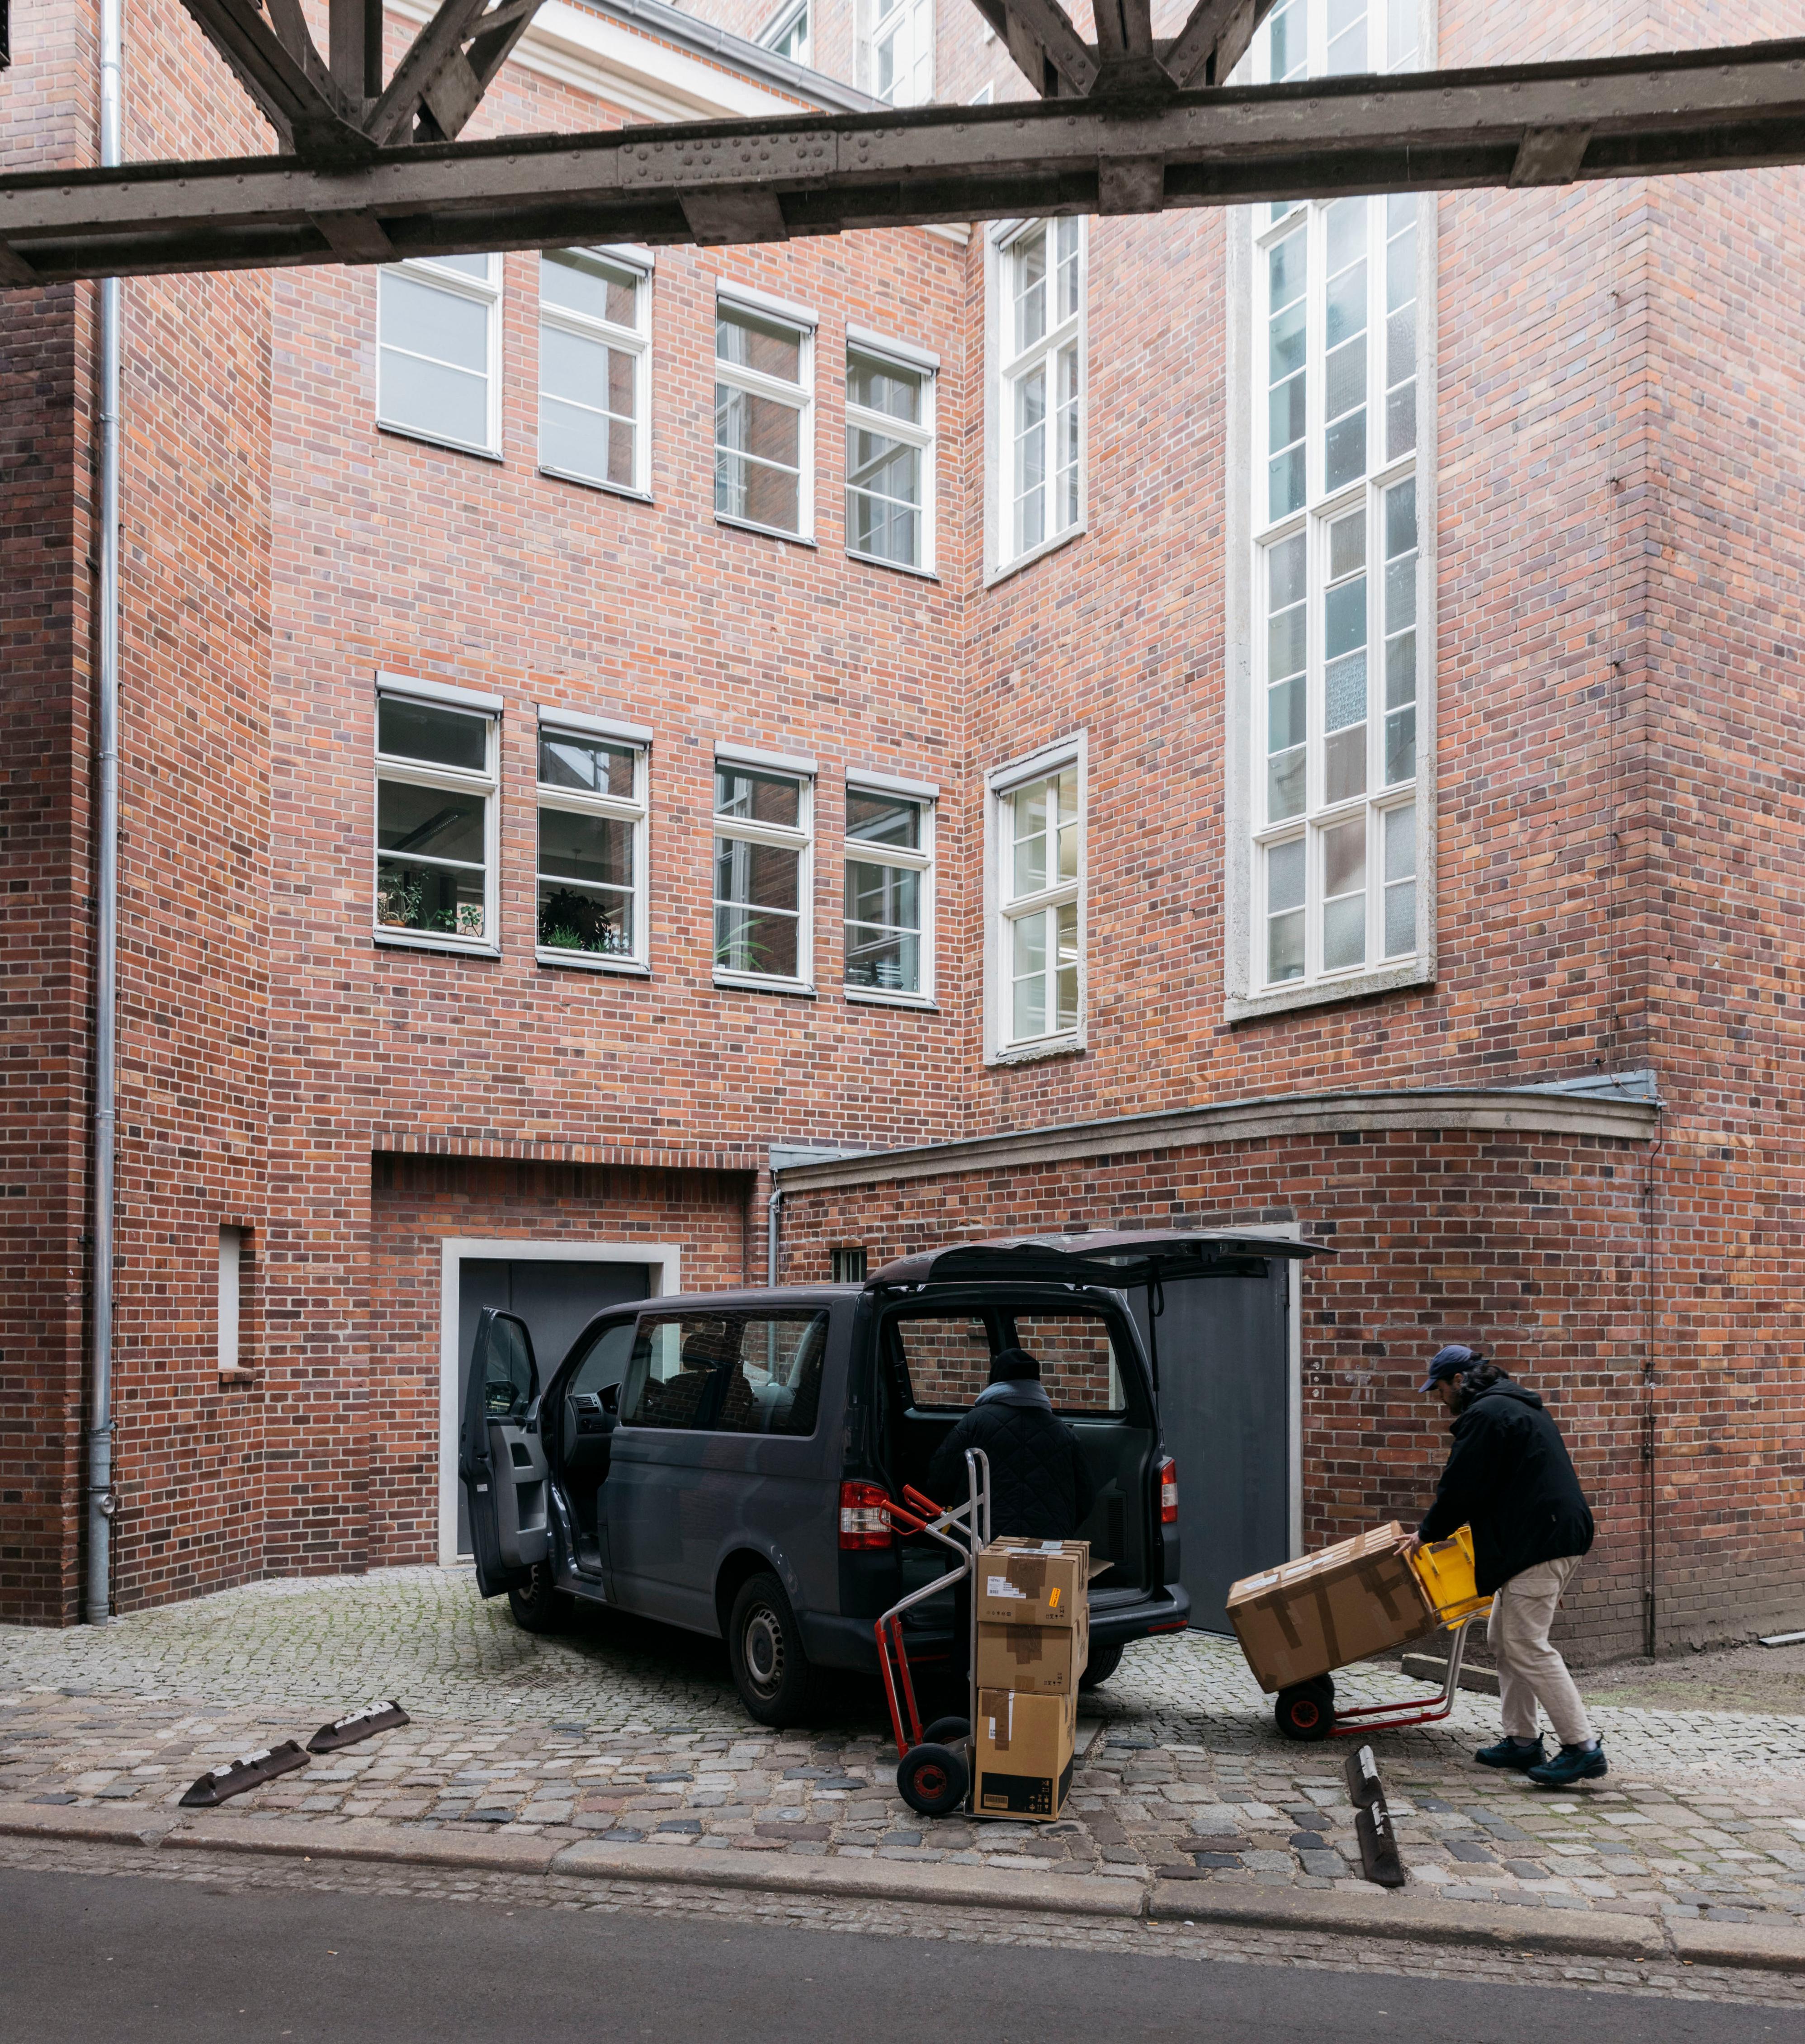 Two logistics employees loading the van. In the background is a red brick building.